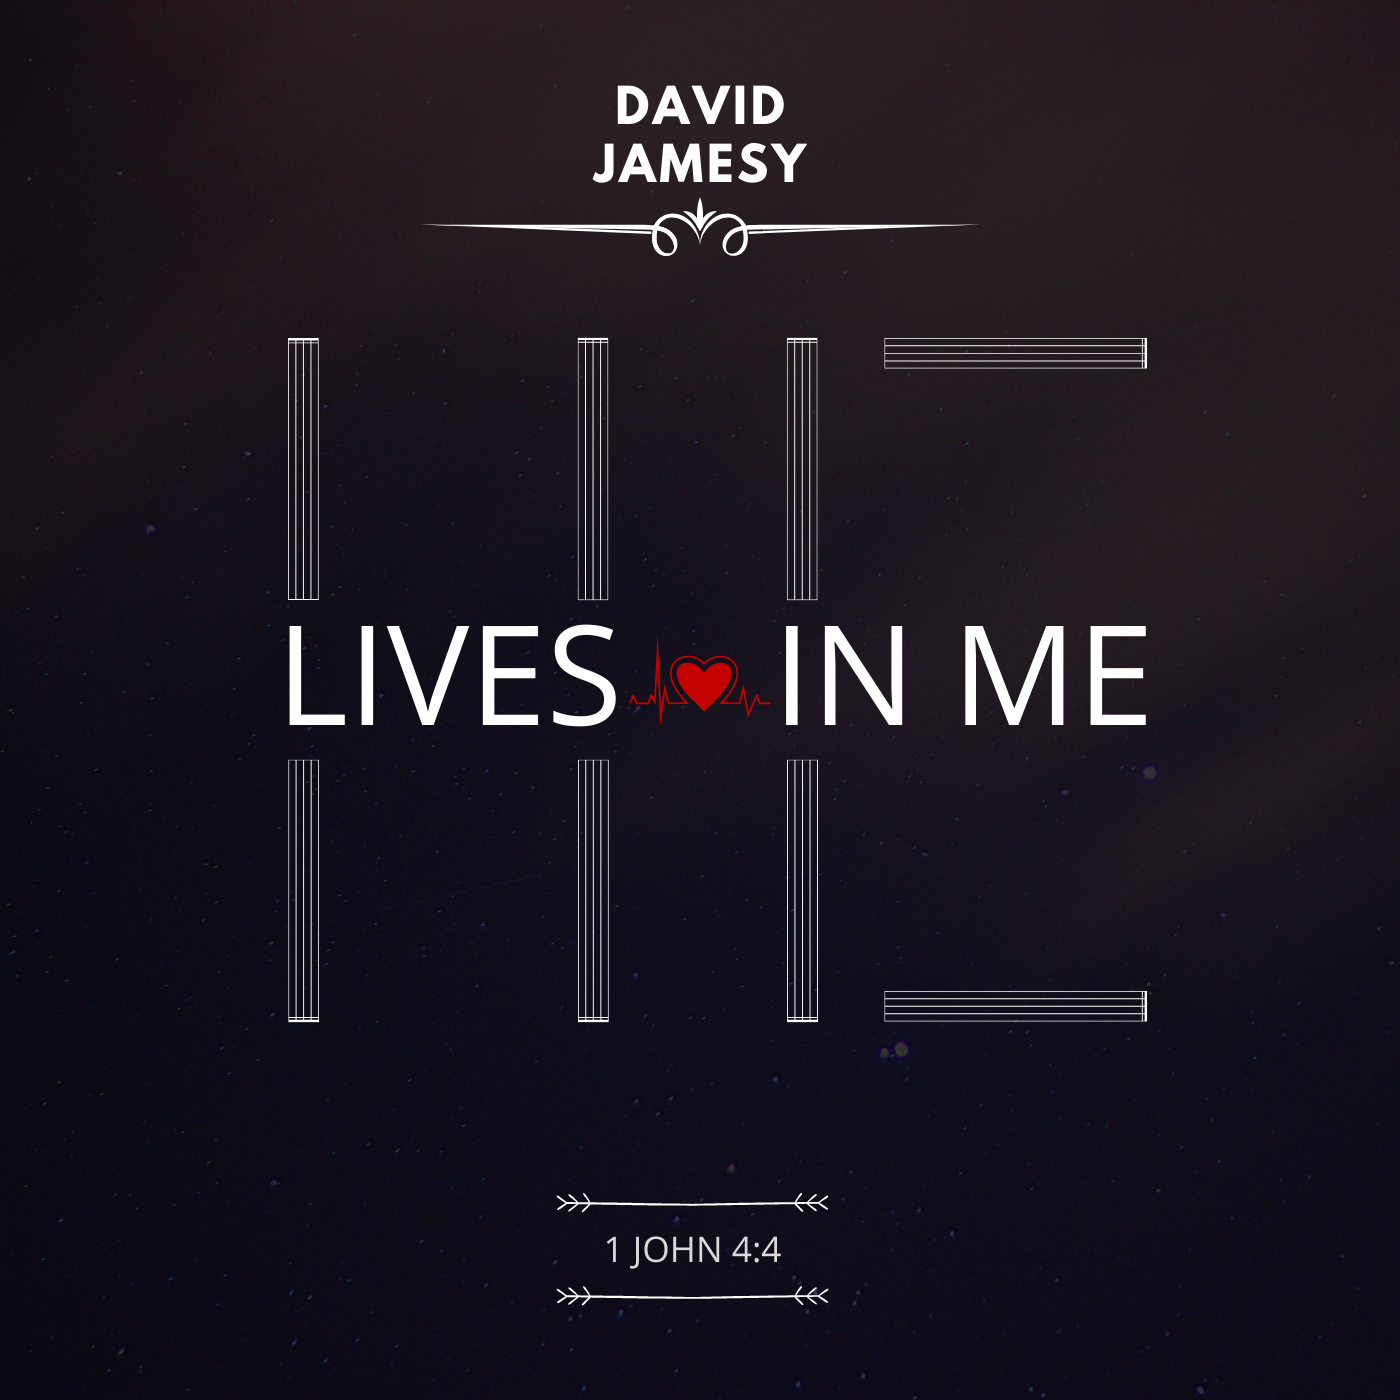 HE LIVES IN ME// MUSICAL SINGLE OUT NOW